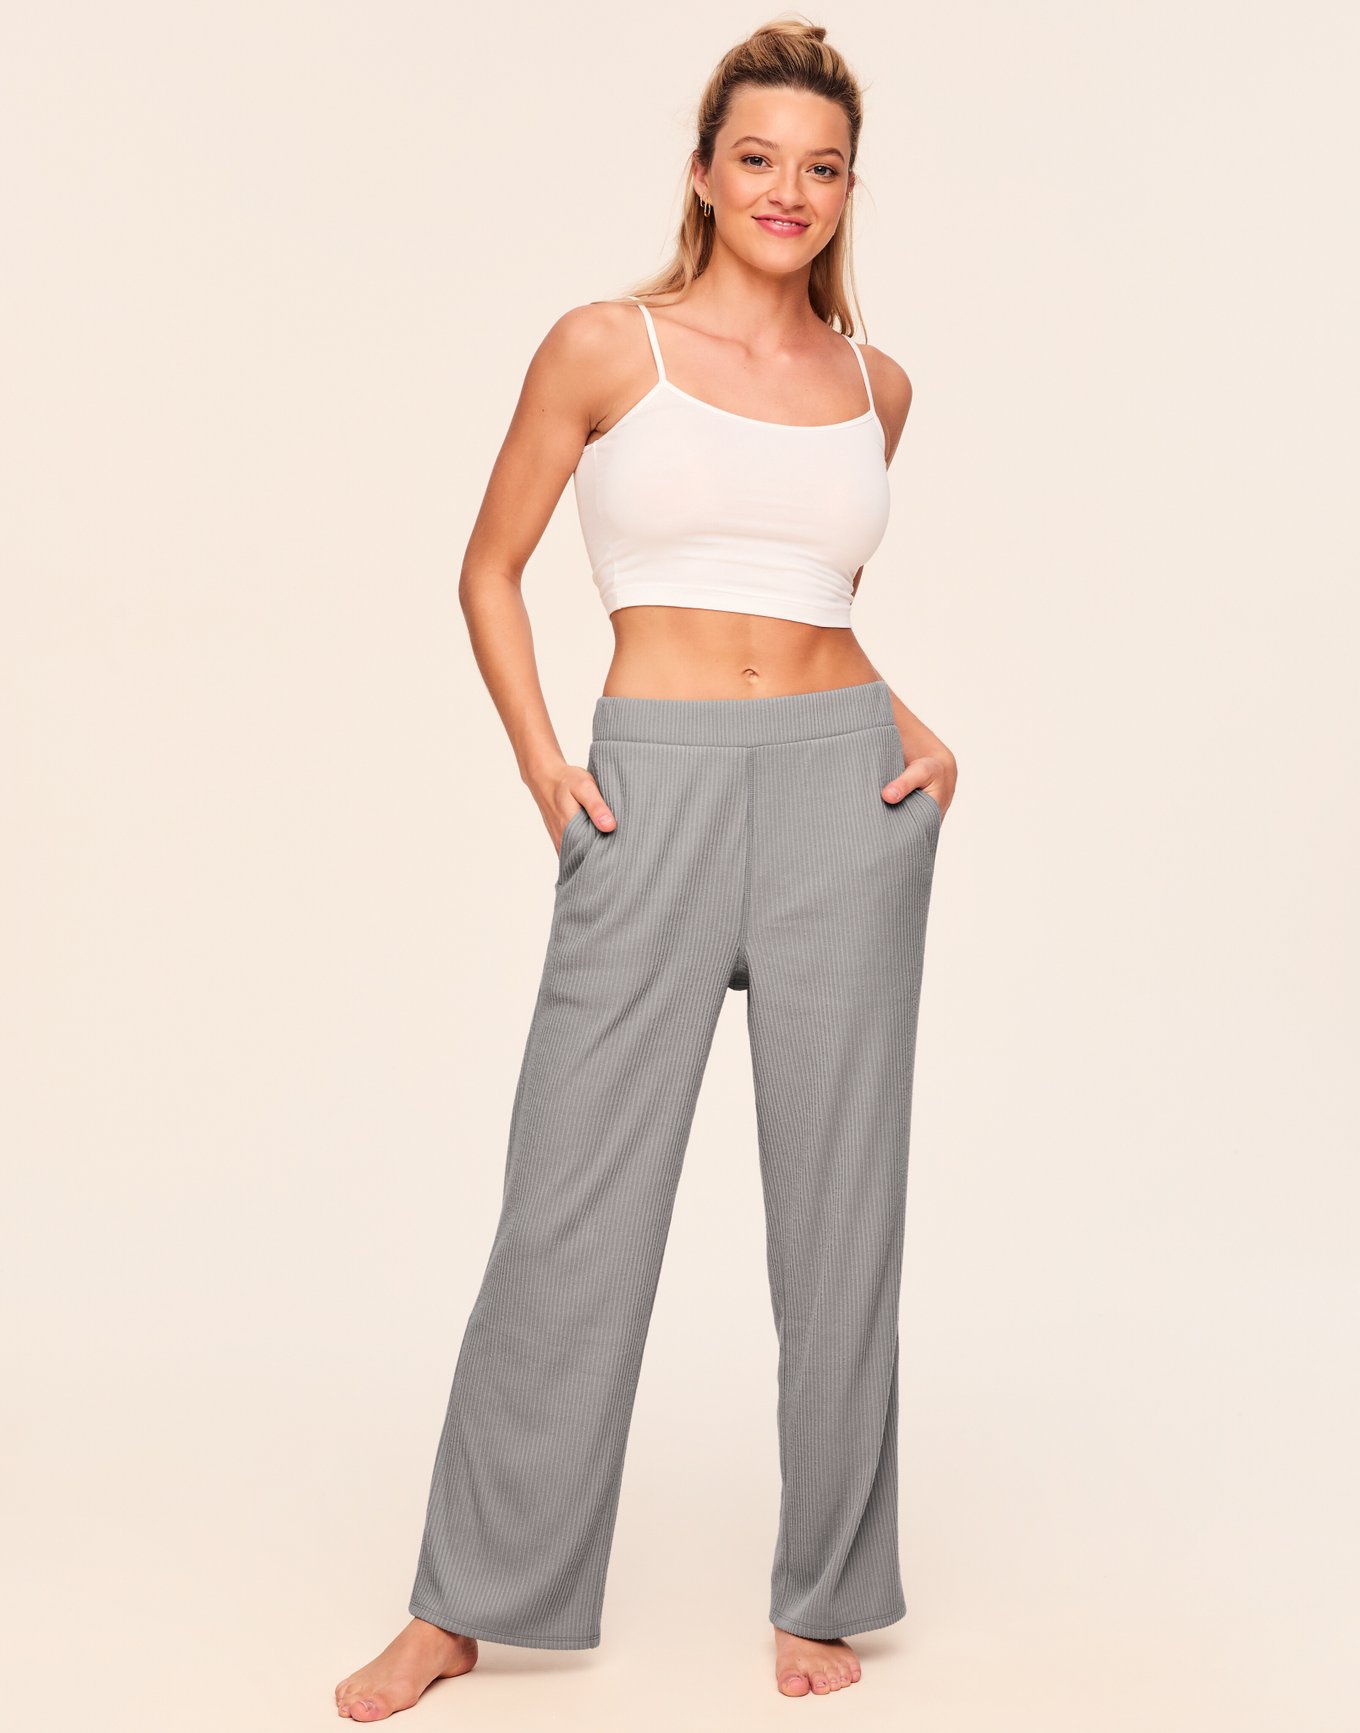 Ambrielle Womens Pajama Pants - JCPenney